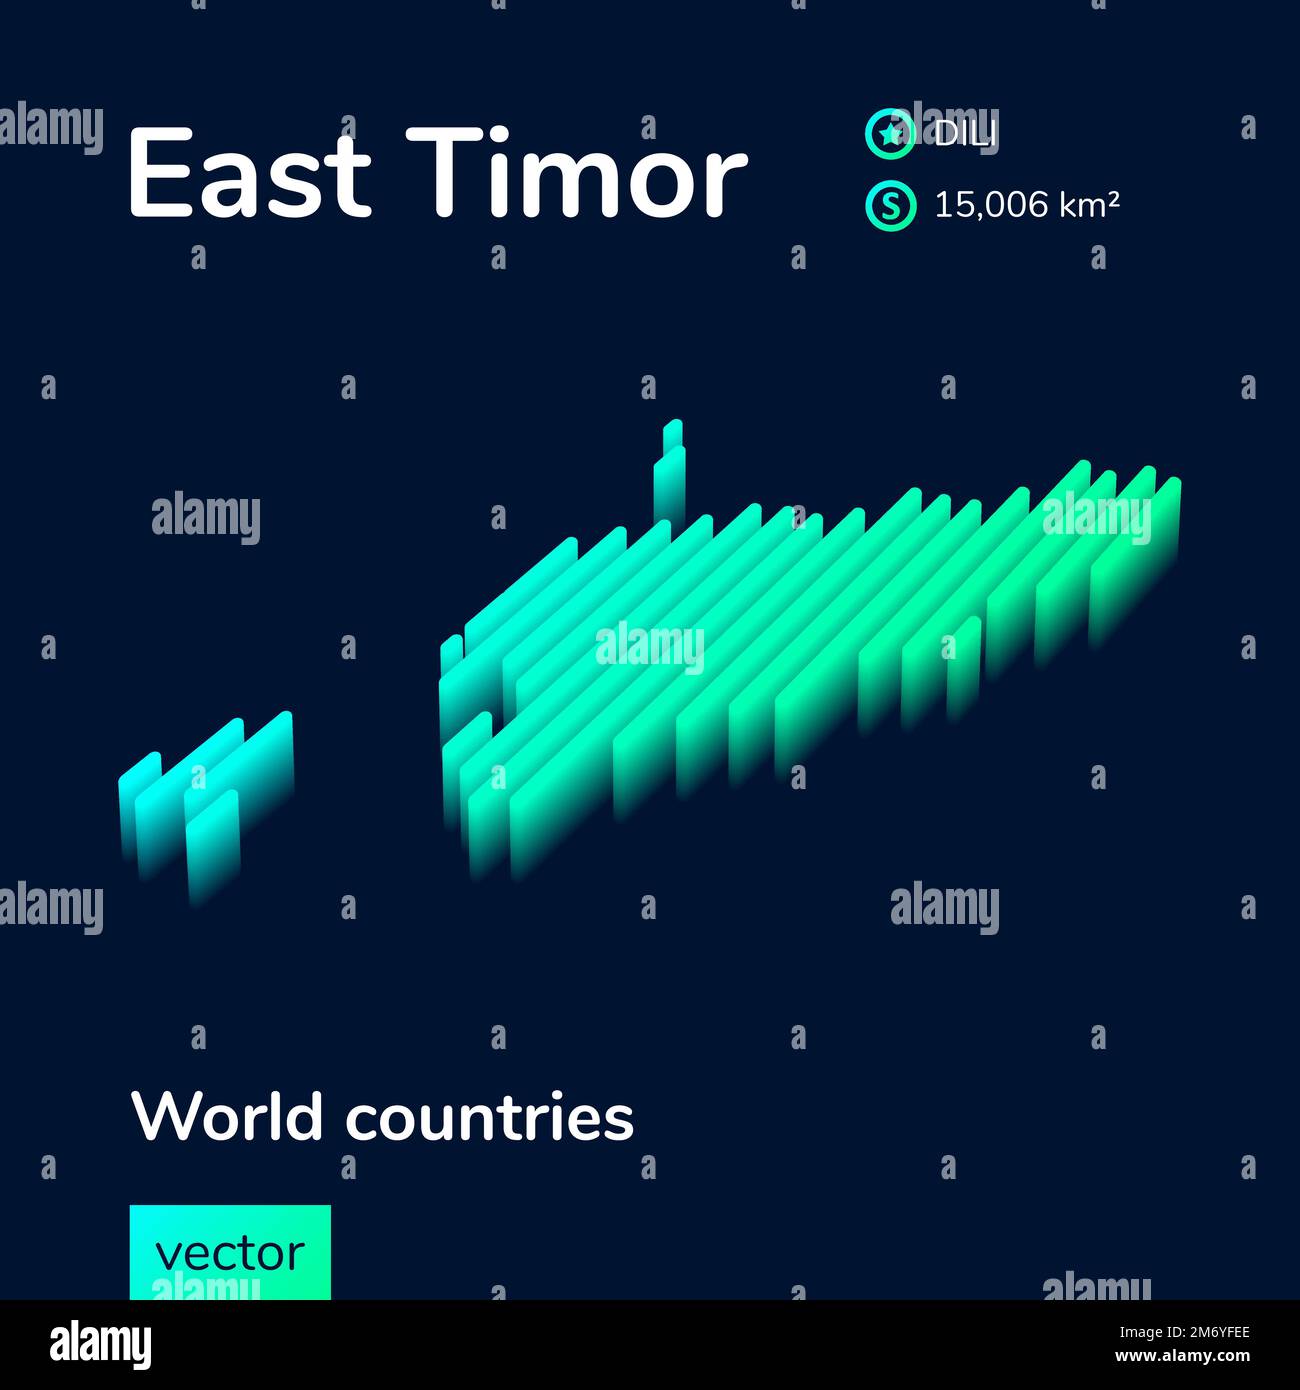 Stylized striped vector isometric map of East Timor with 3d effect. Map of East Timor is in neon green and mint colors on the dark blue background Stock Vector